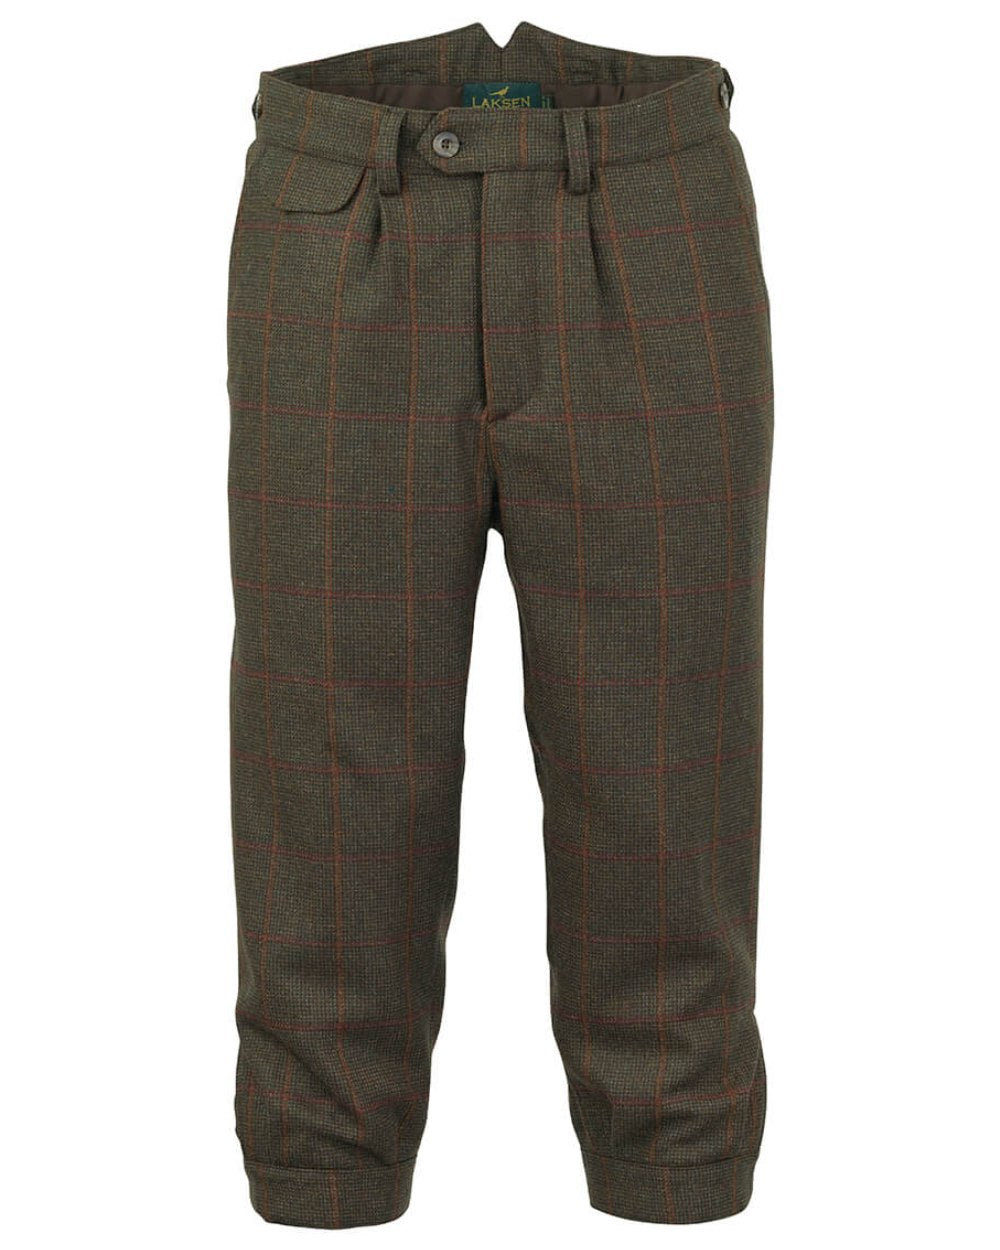 Laksen Hastings Breeks With CTX On A White Background